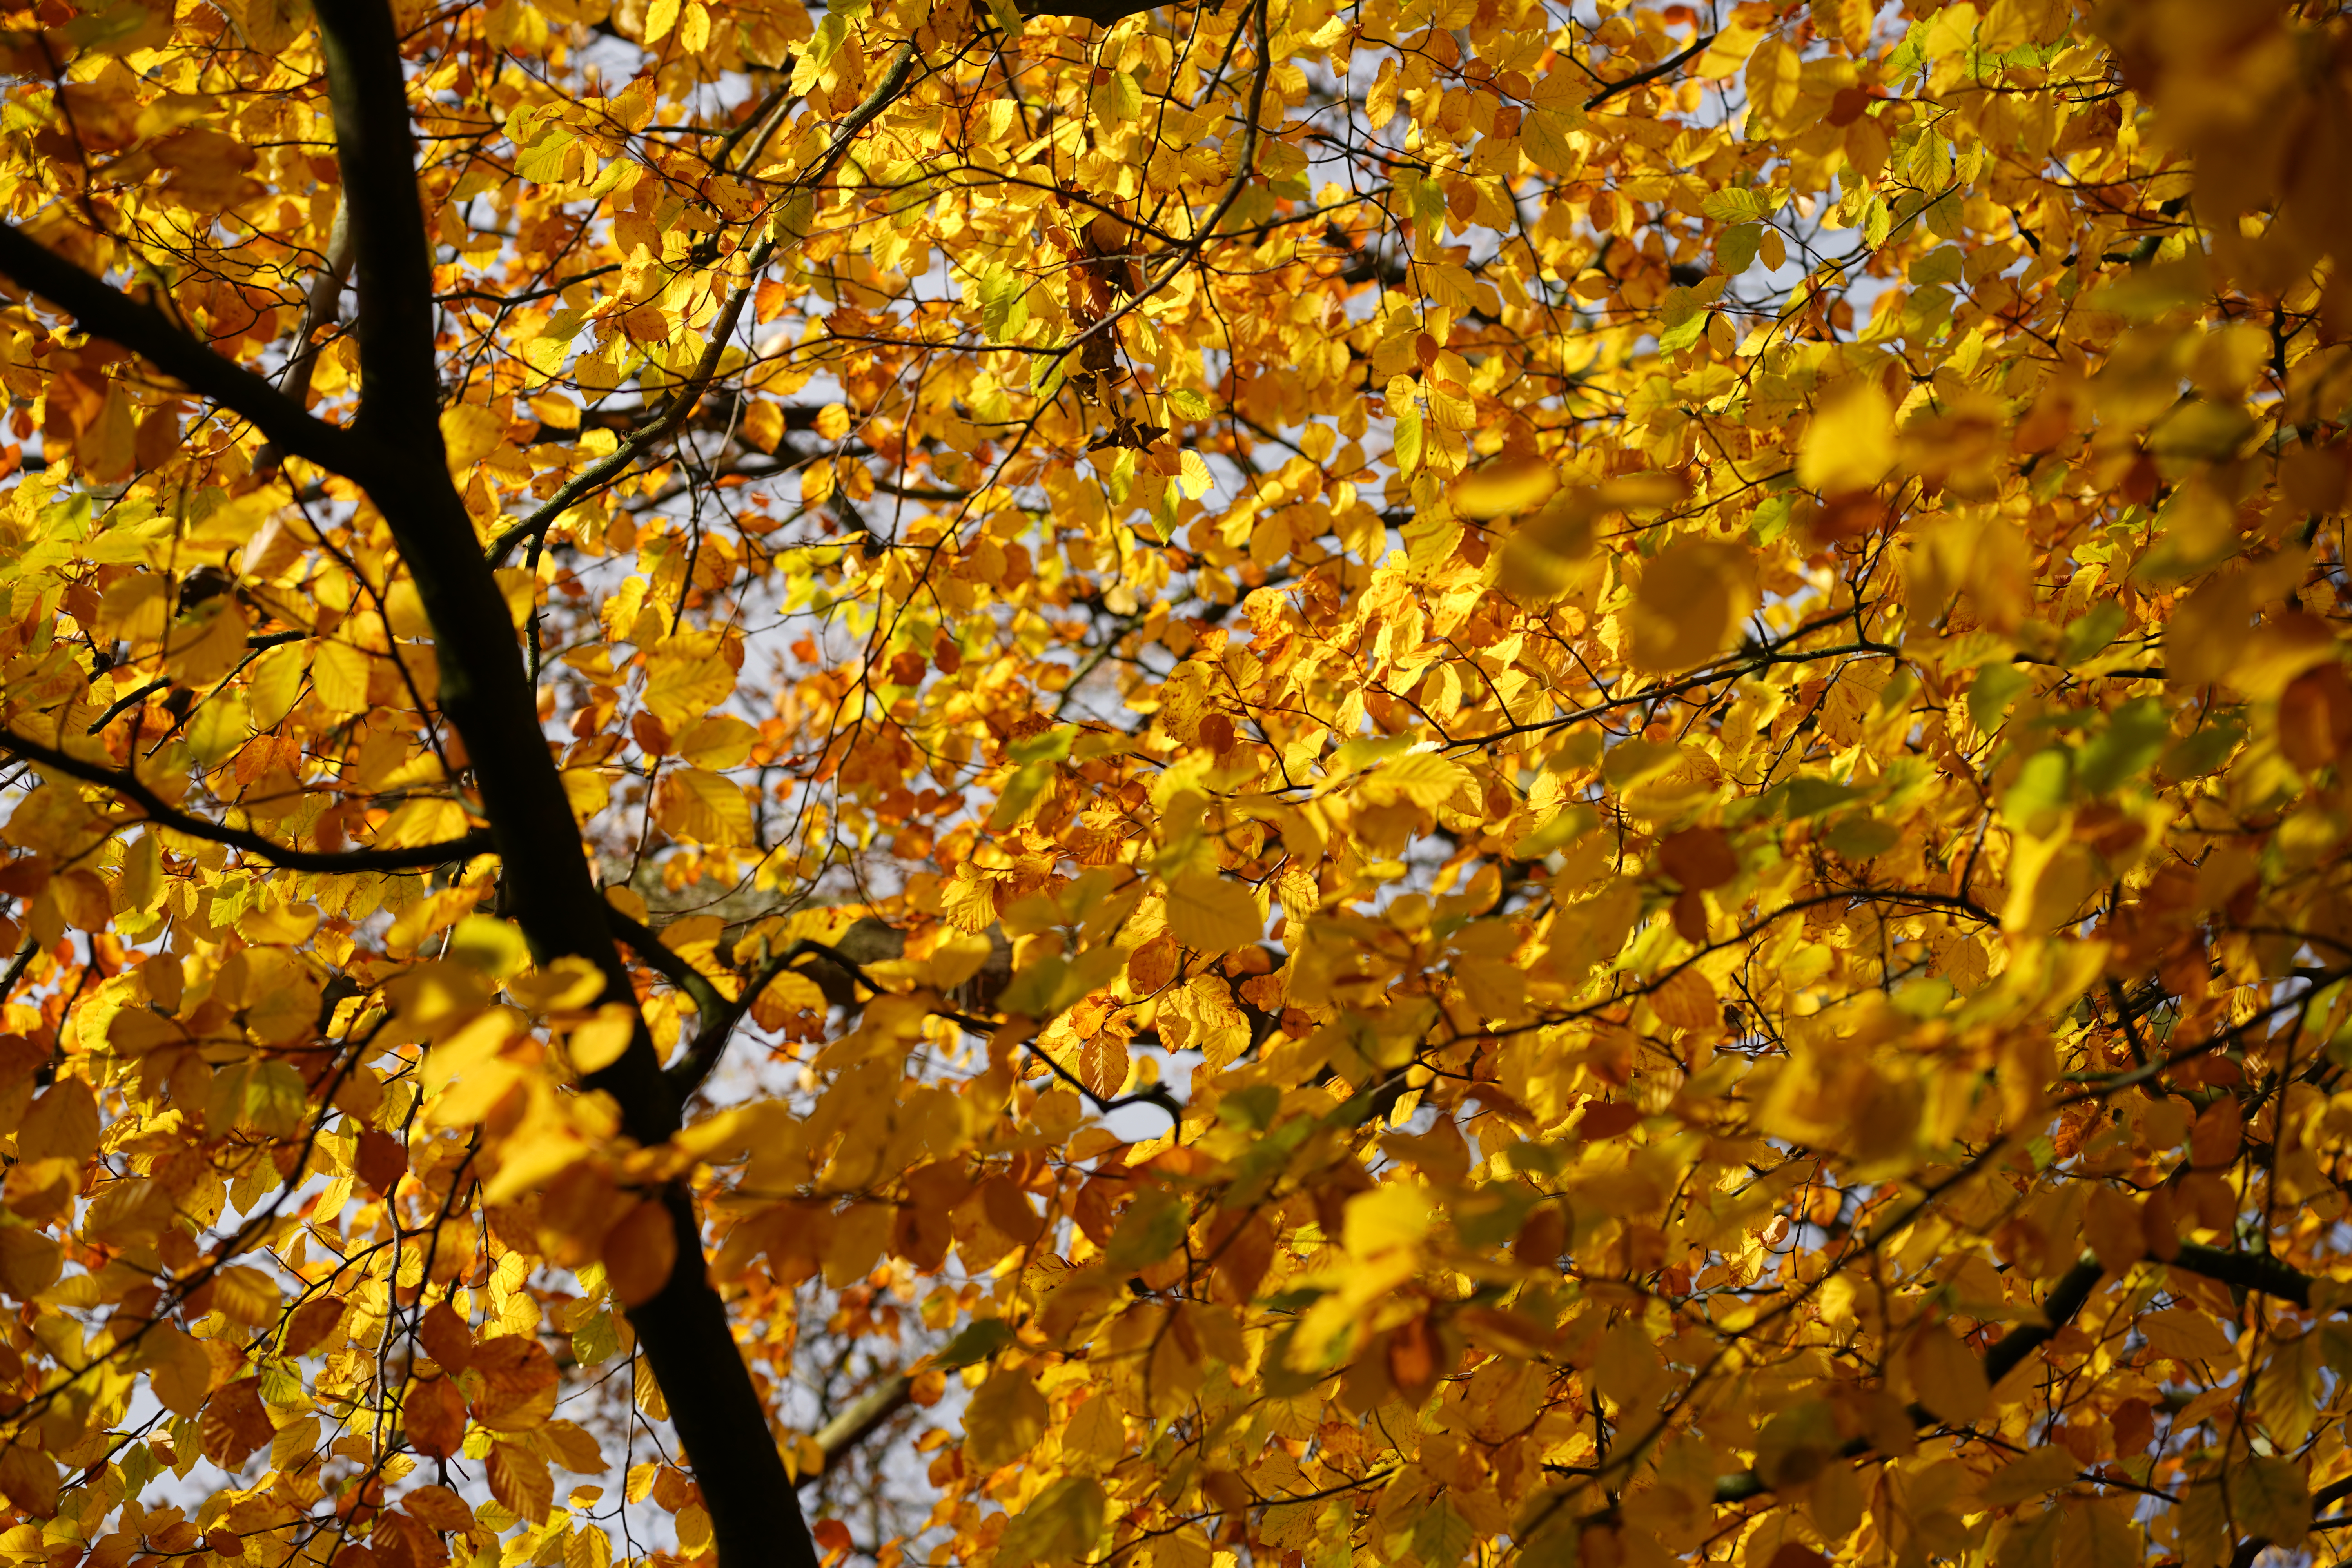 Yellow leaves, Sigma 90mm DG DN, 1/250s, f/4, ISO50, 90mm